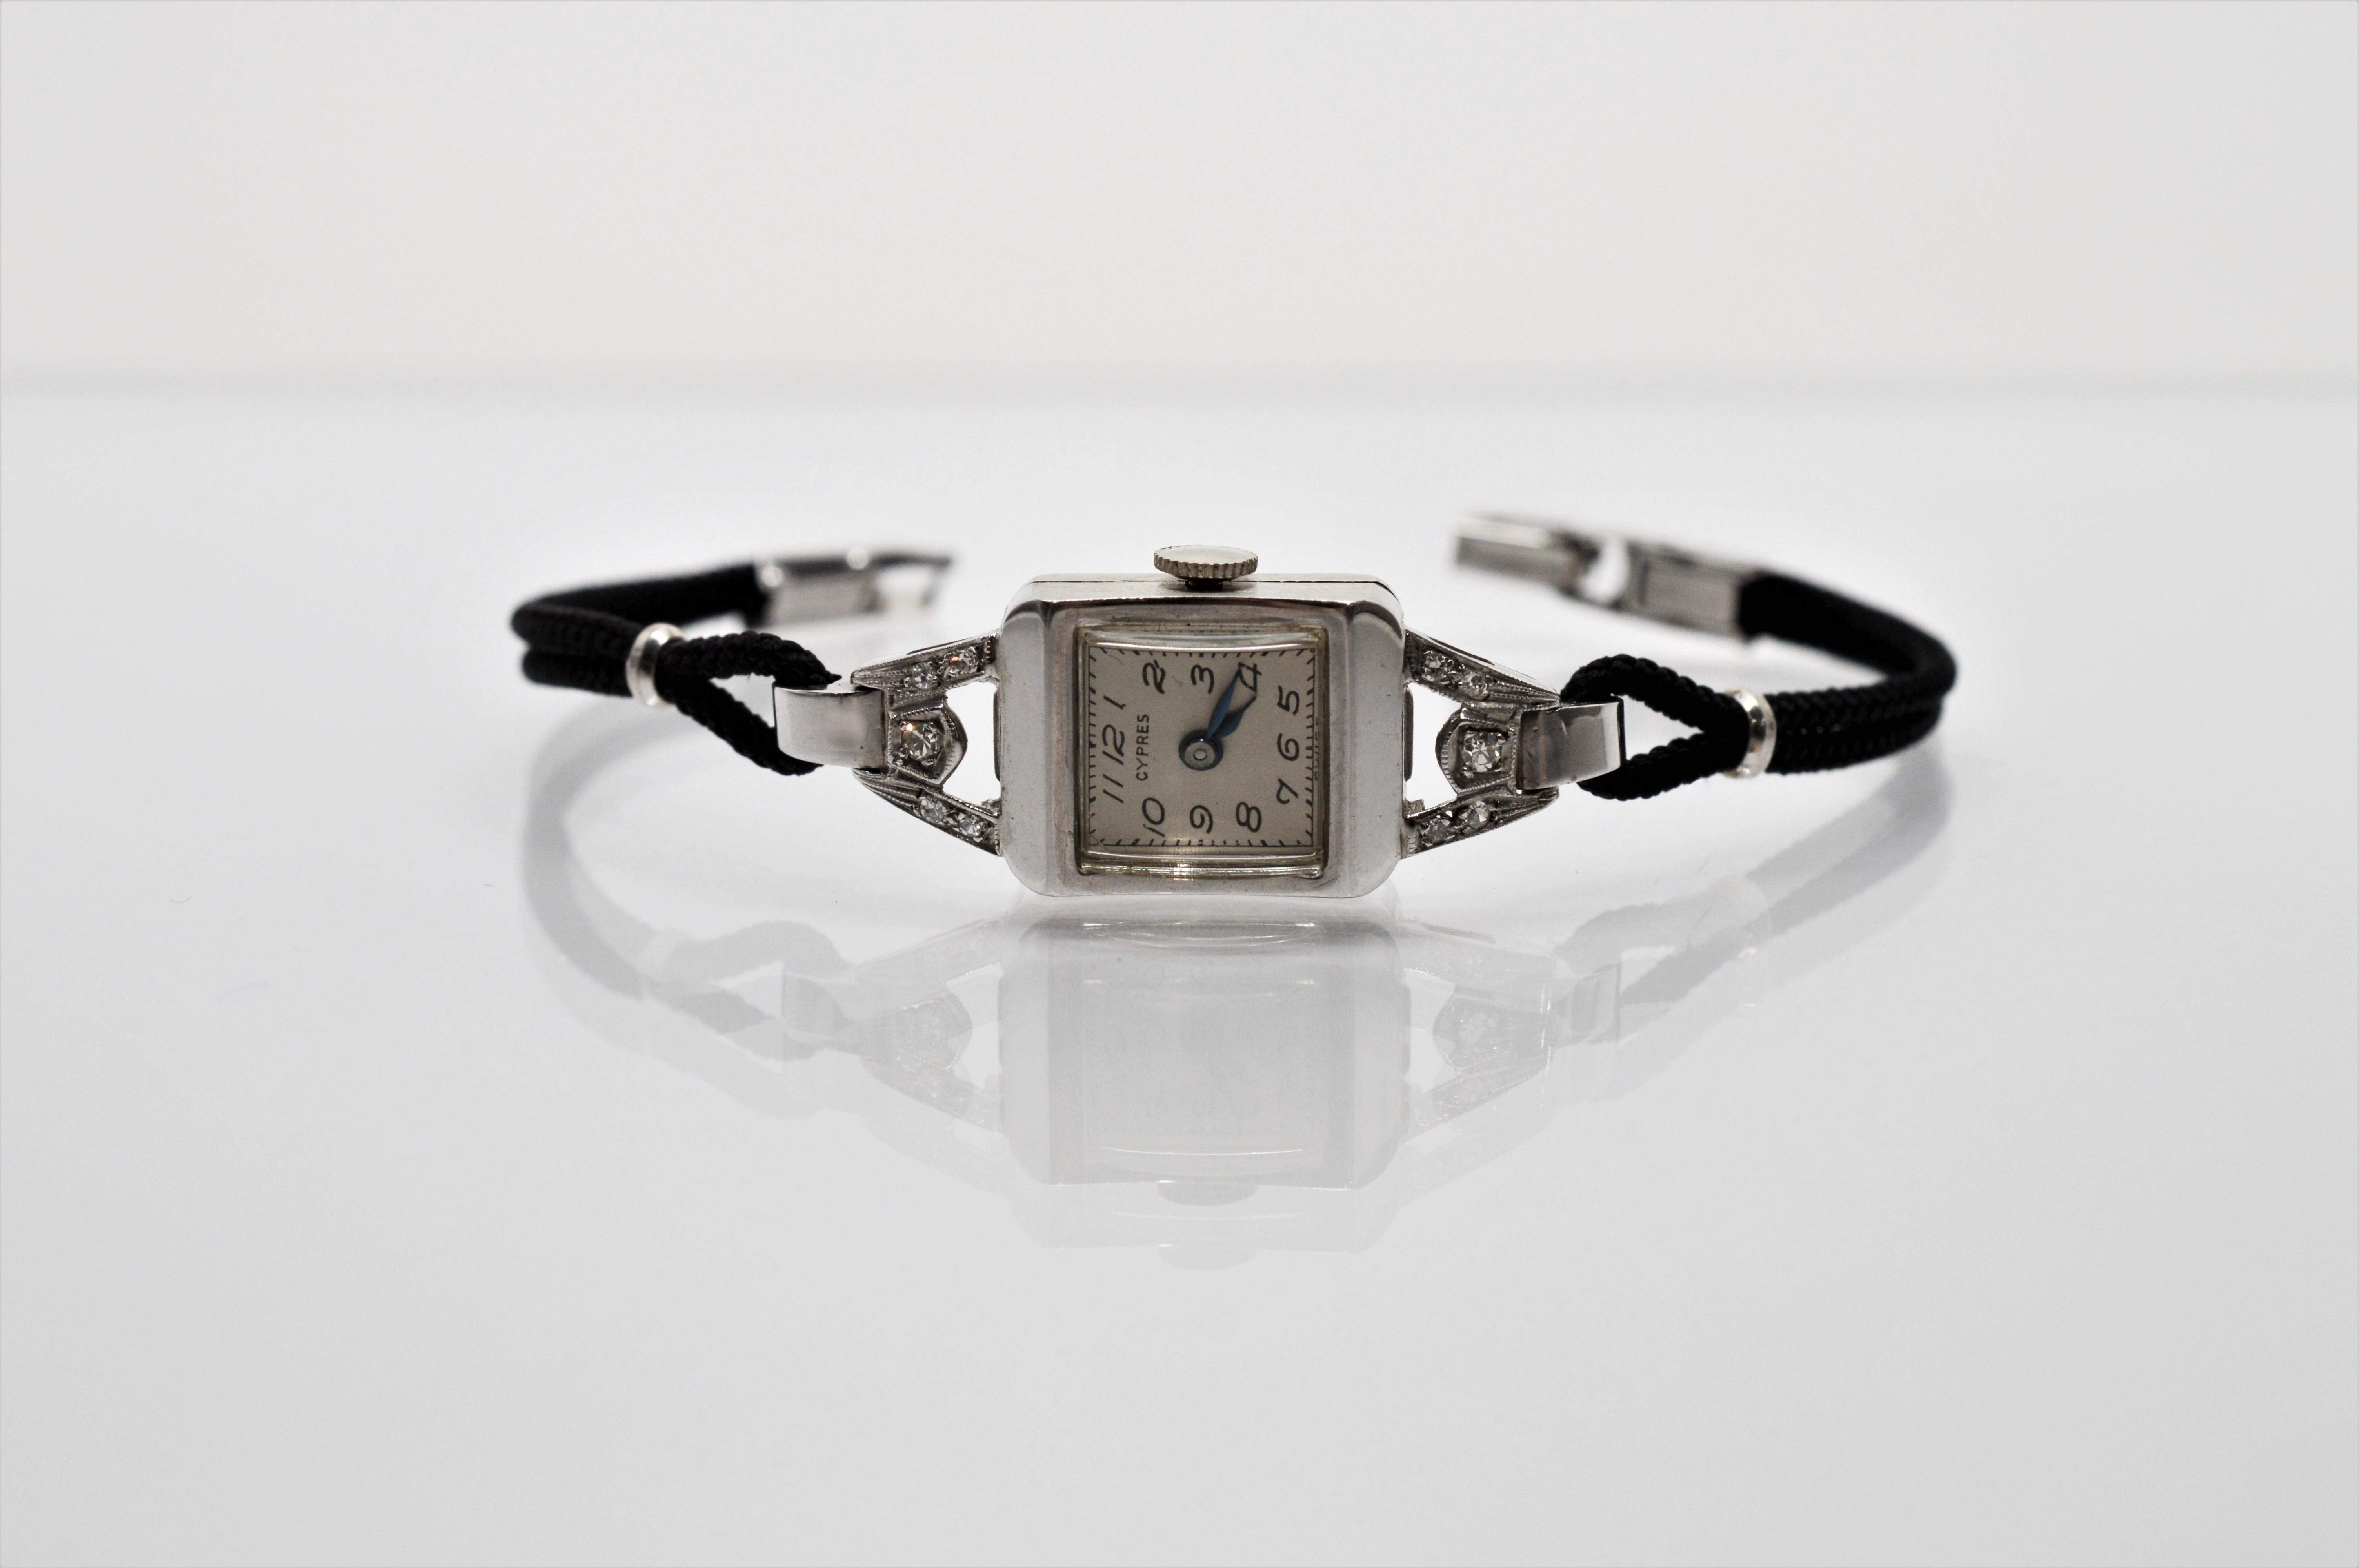 Classic vintage bracelet wrist watch with diamonds in fourteen karat white gold. Has working Swiss Dreffa 17 jeweled movement. The petite square watch head measures 1/2 x 5/8 inch and ten diamonds adorn the lugs at the top and bottom of the head.